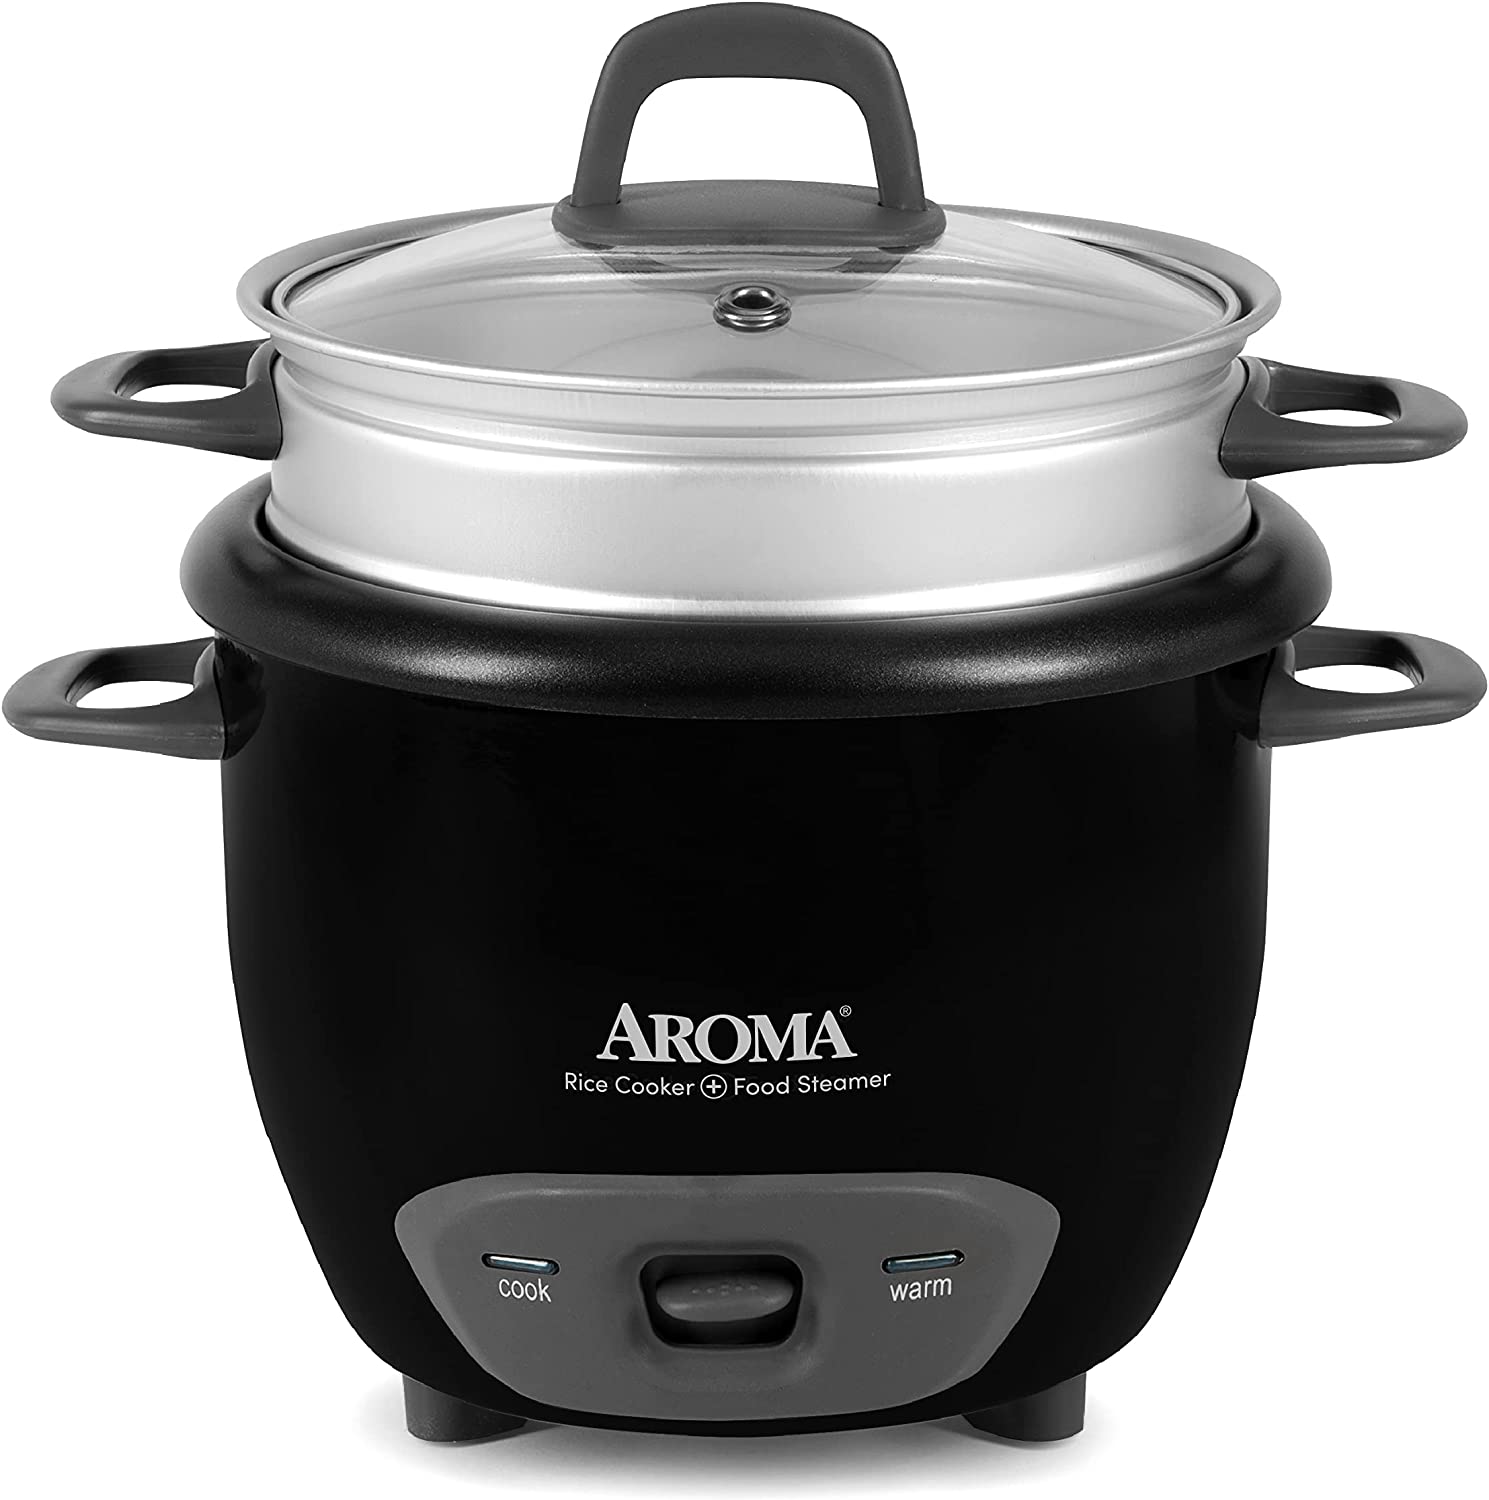 https://www.dontwasteyourmoney.com/wp-content/uploads/2019/08/aroma-housewares-6-cup-cooked-pot-style-rice-cooker-1.jpg